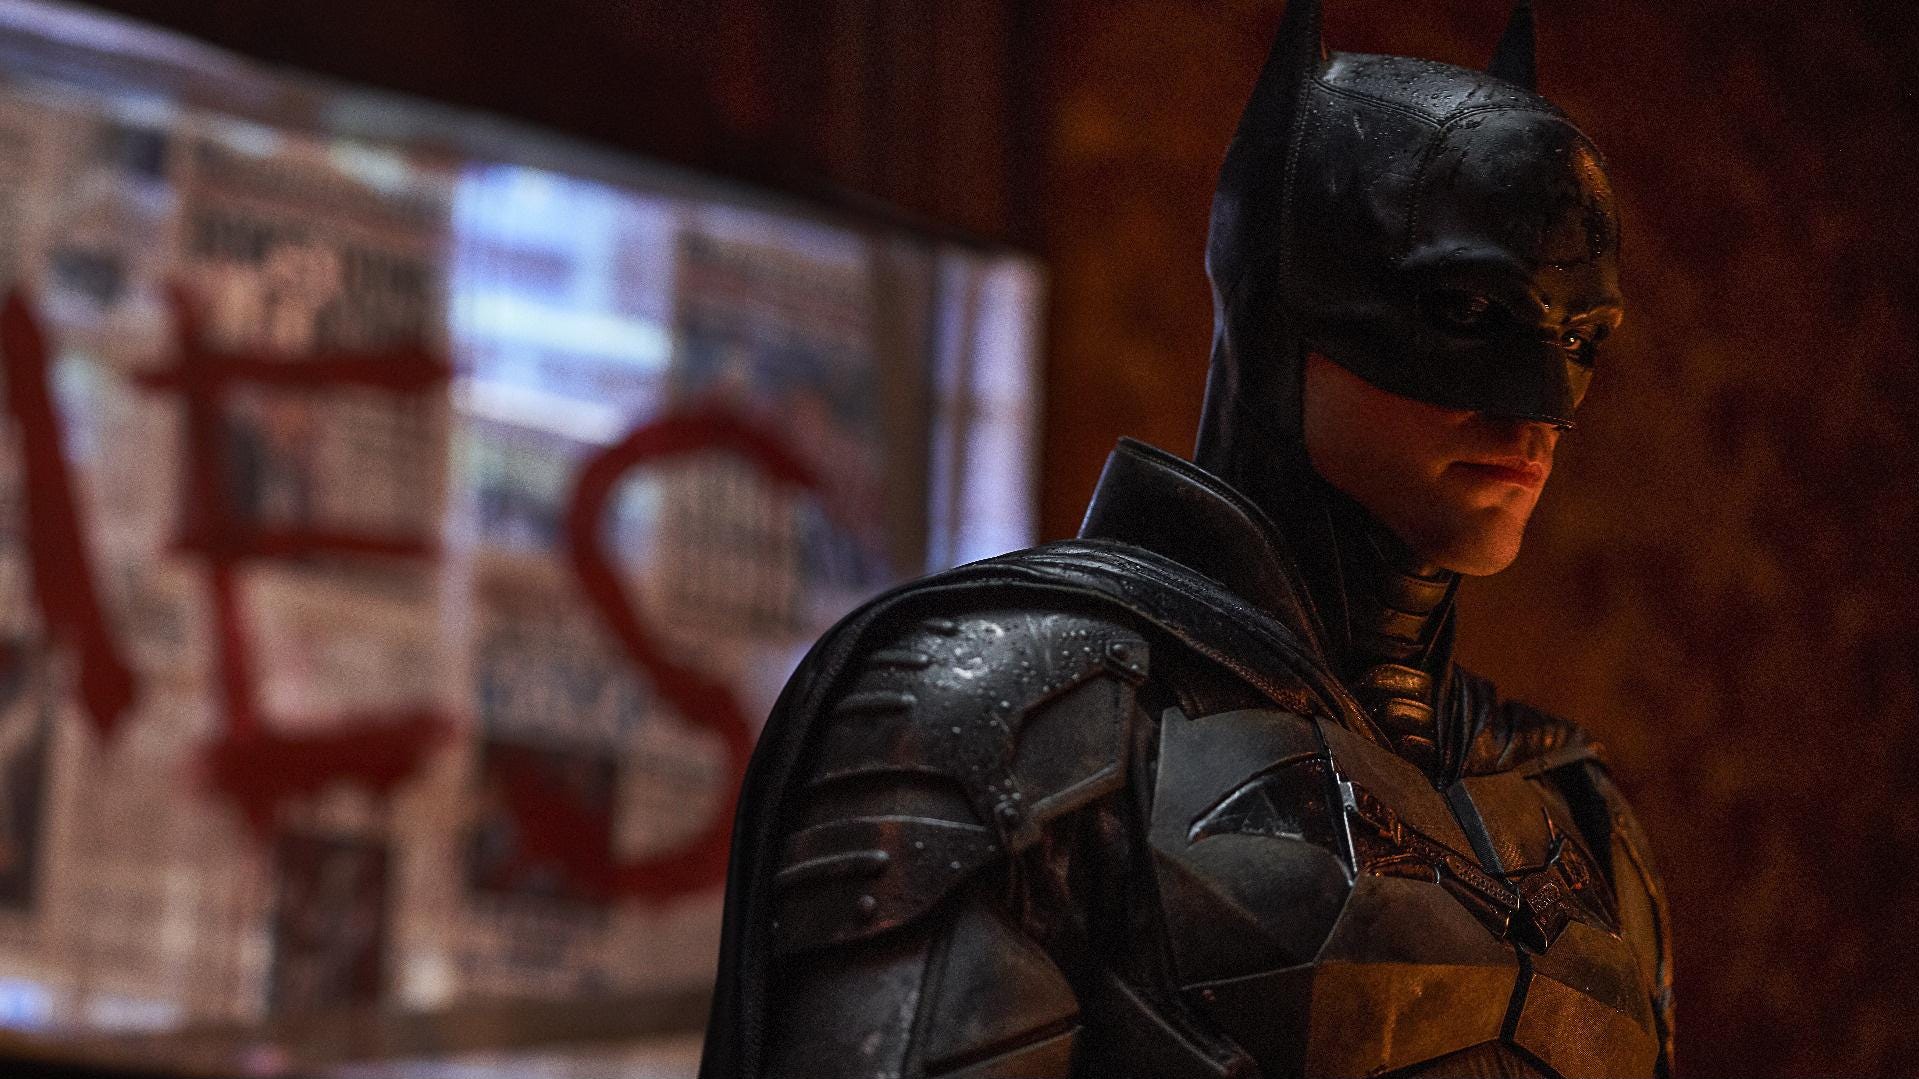 The Batman is now streaming on HBO Max